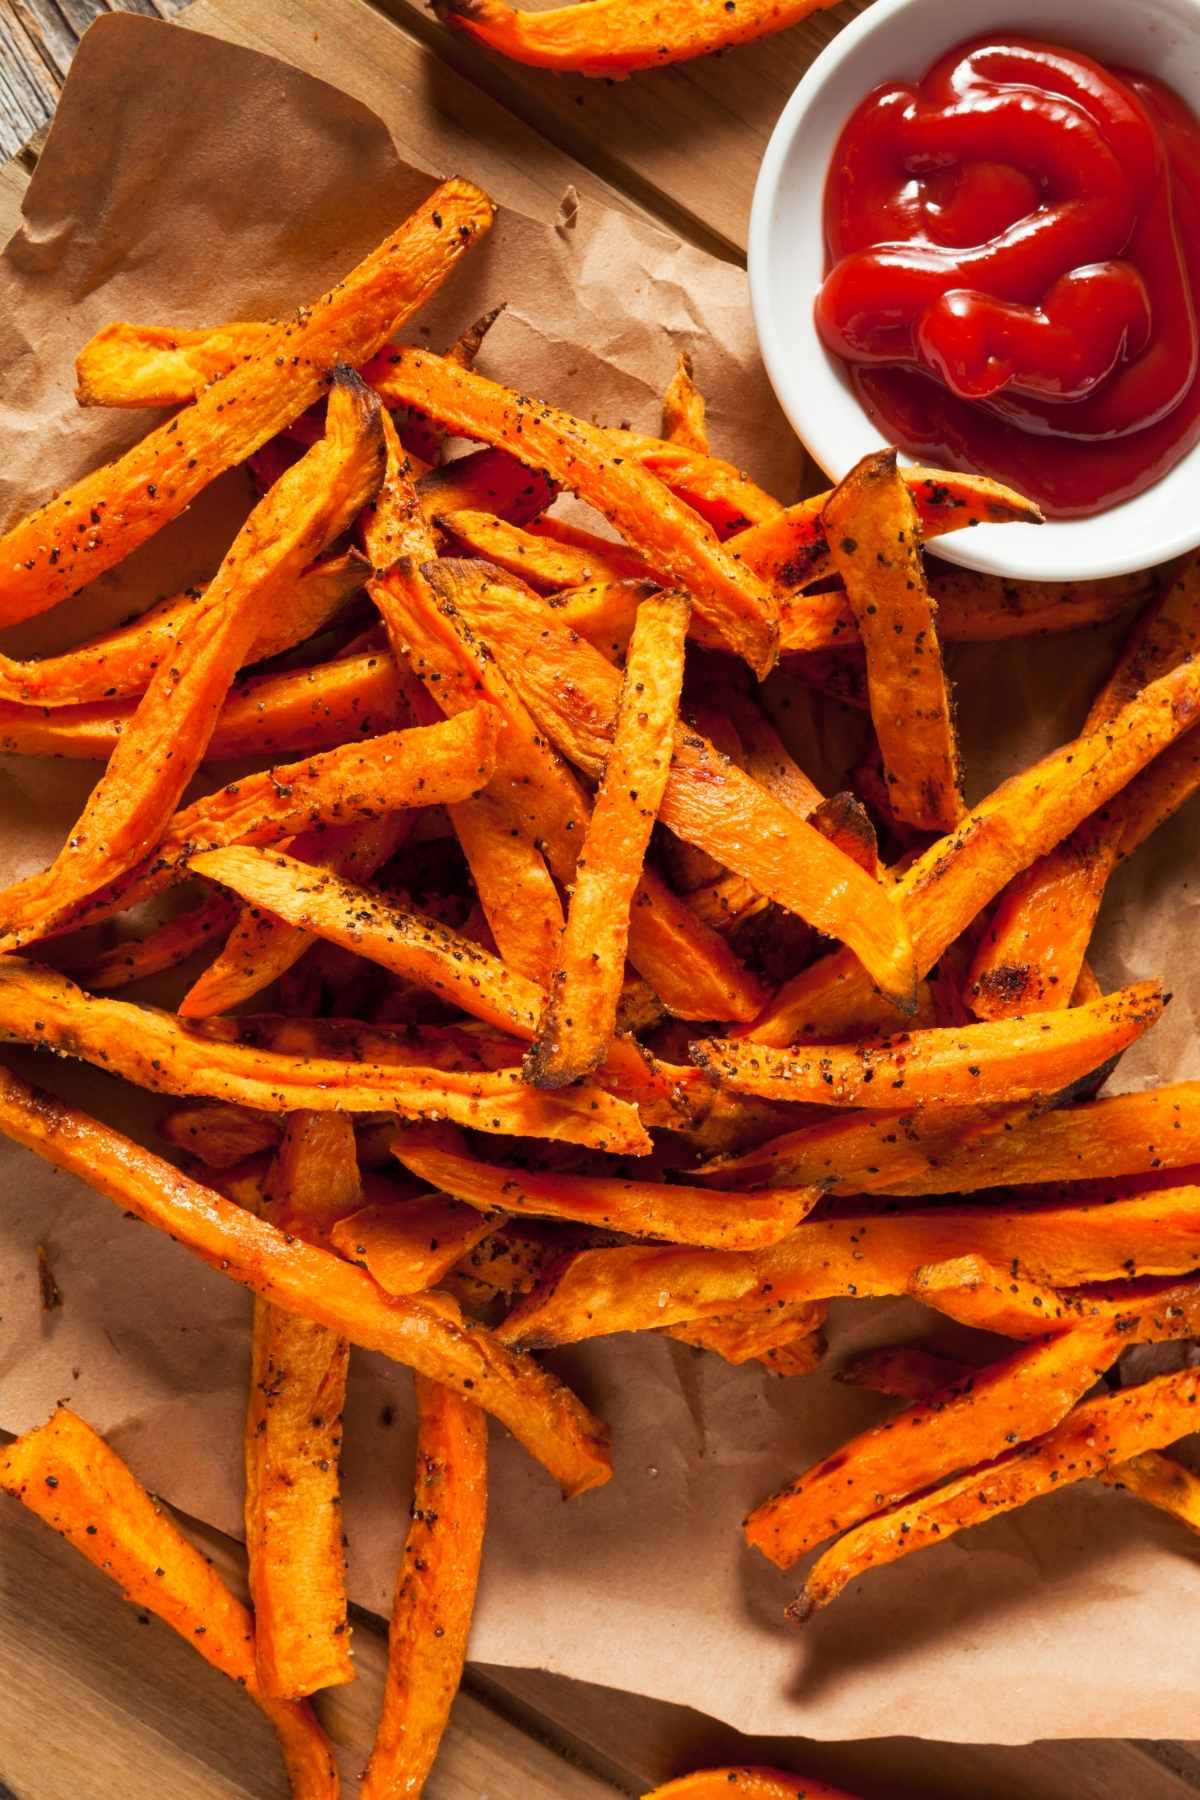 Looking for a healthier alternative to deep-fried French fries? Baked Sweet Potato Fries are just the thing. With a sweet and salty flavor, these crispy easy-to-make fries will be a new family favorite.